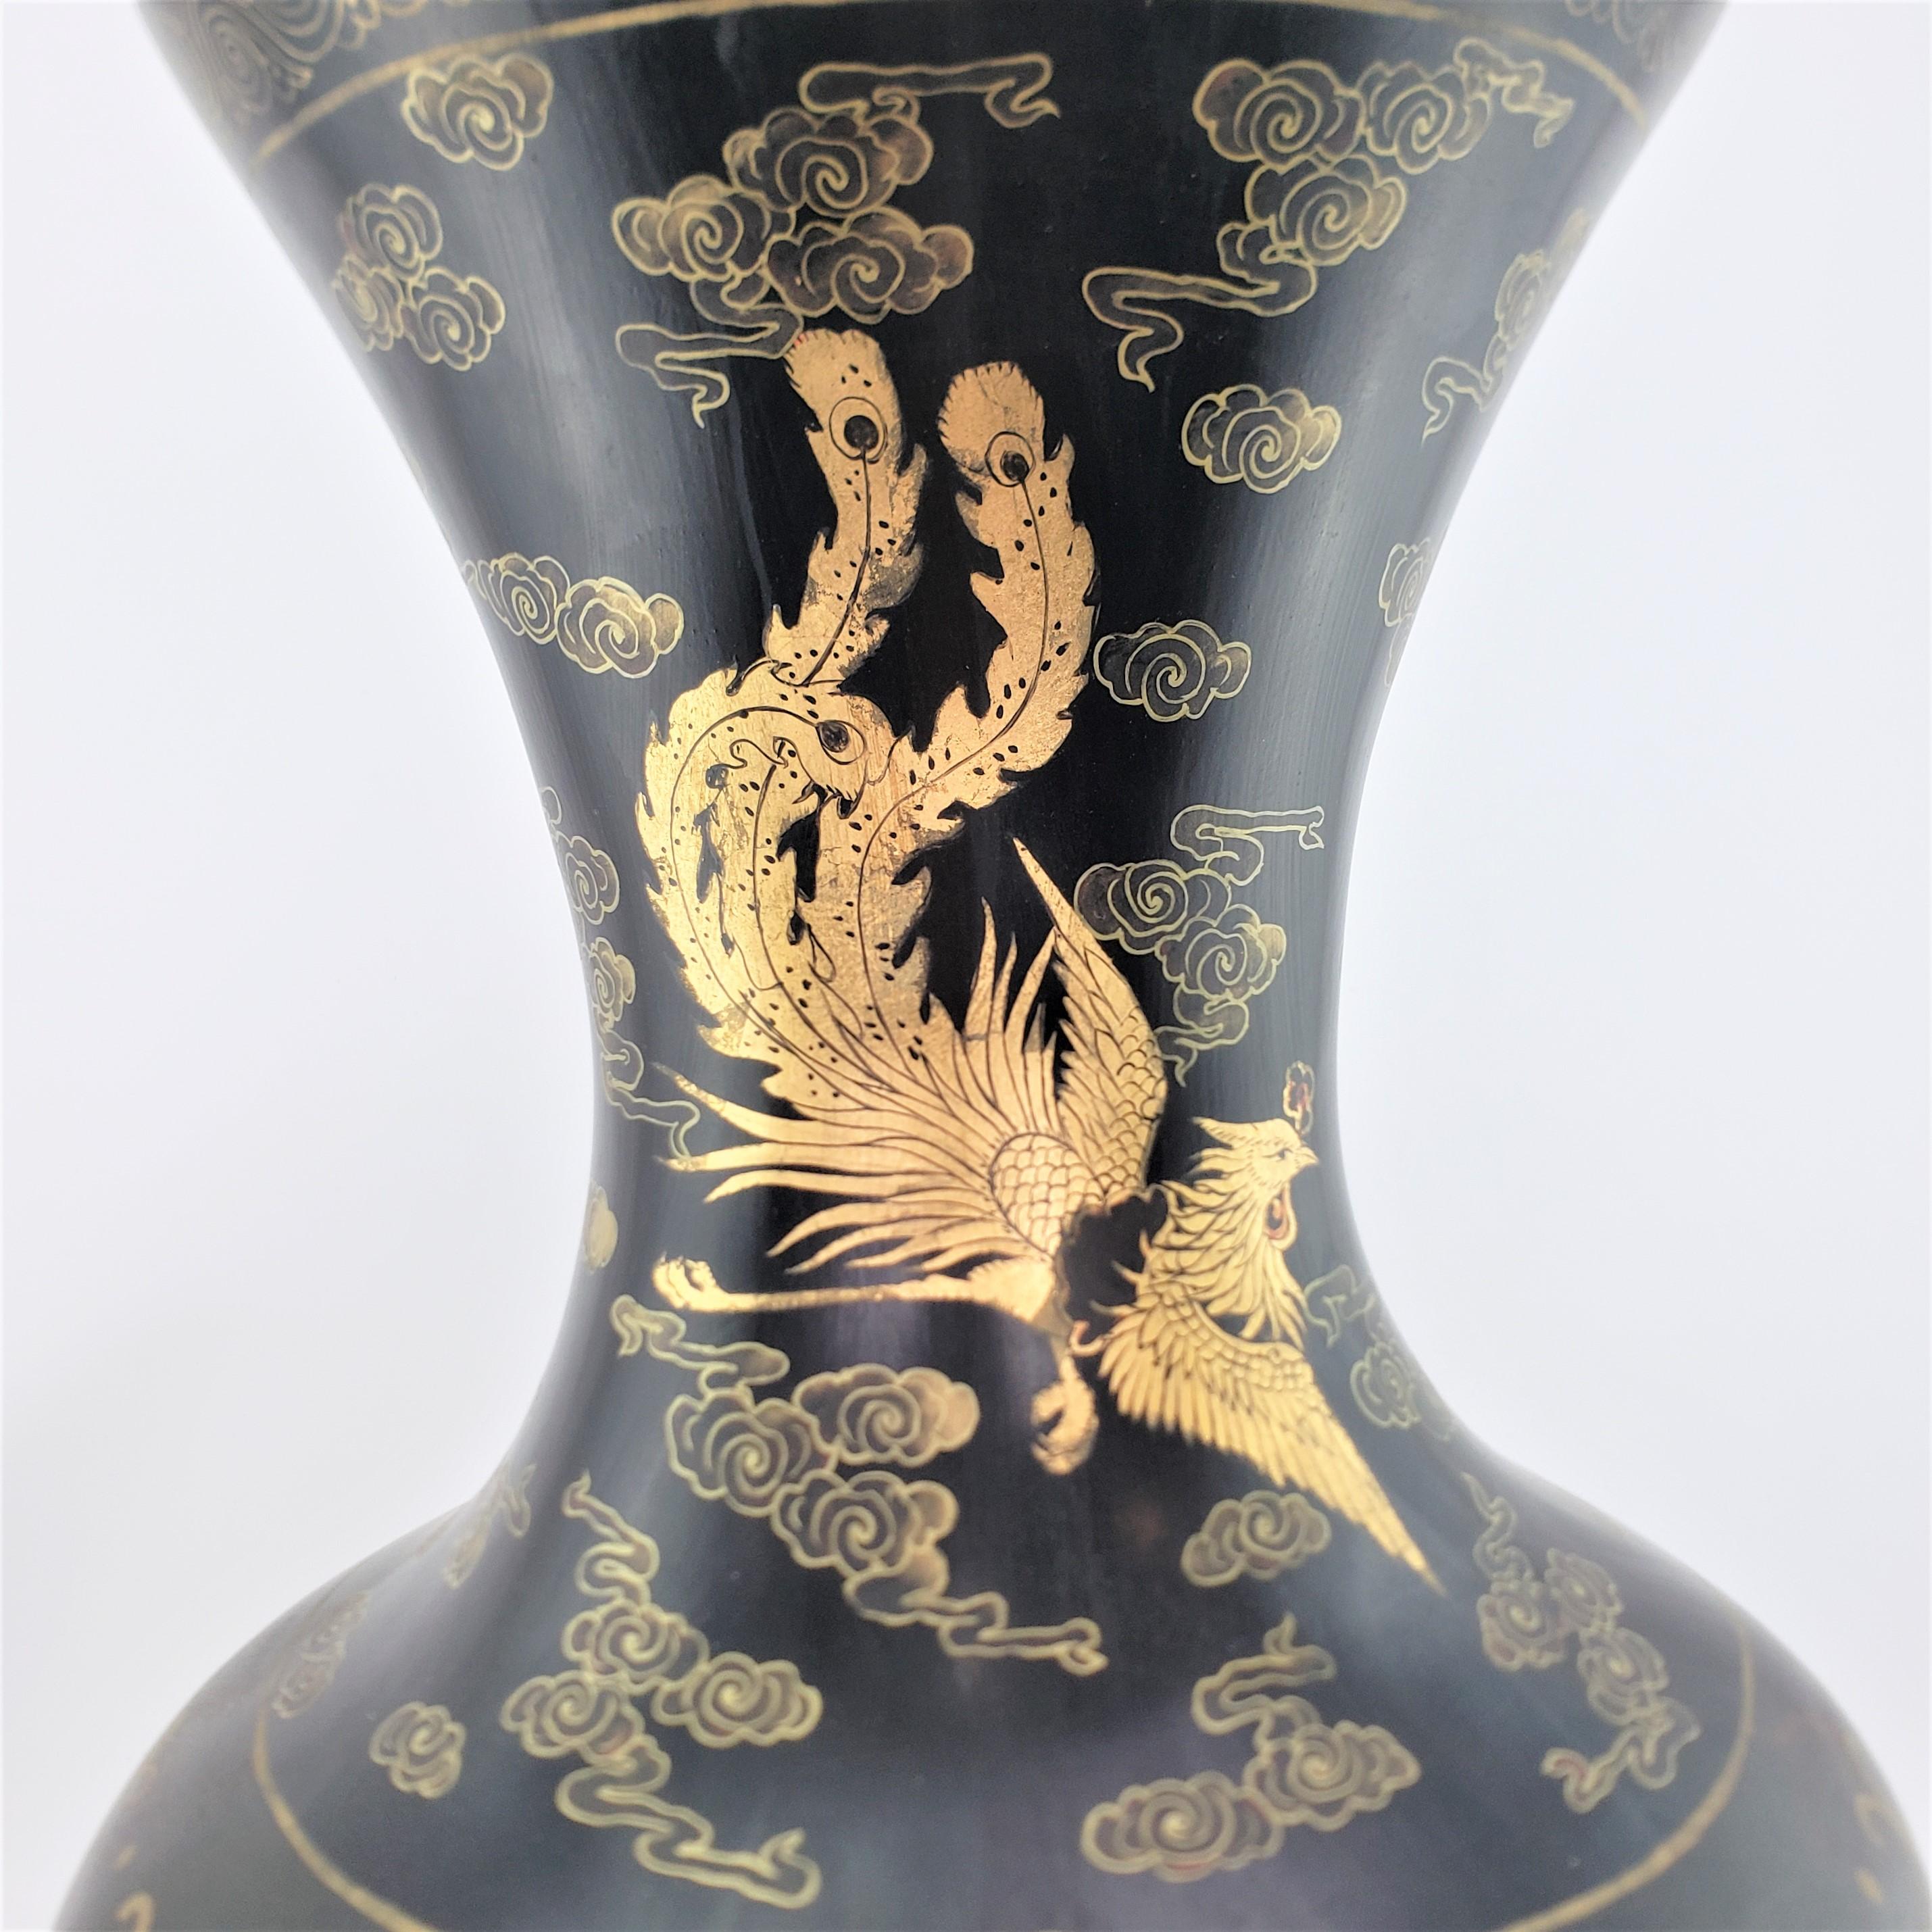 Huge Antique Chinese Paper Mache Floor Vase with Hand-Painted Gilt Decoration For Sale 2